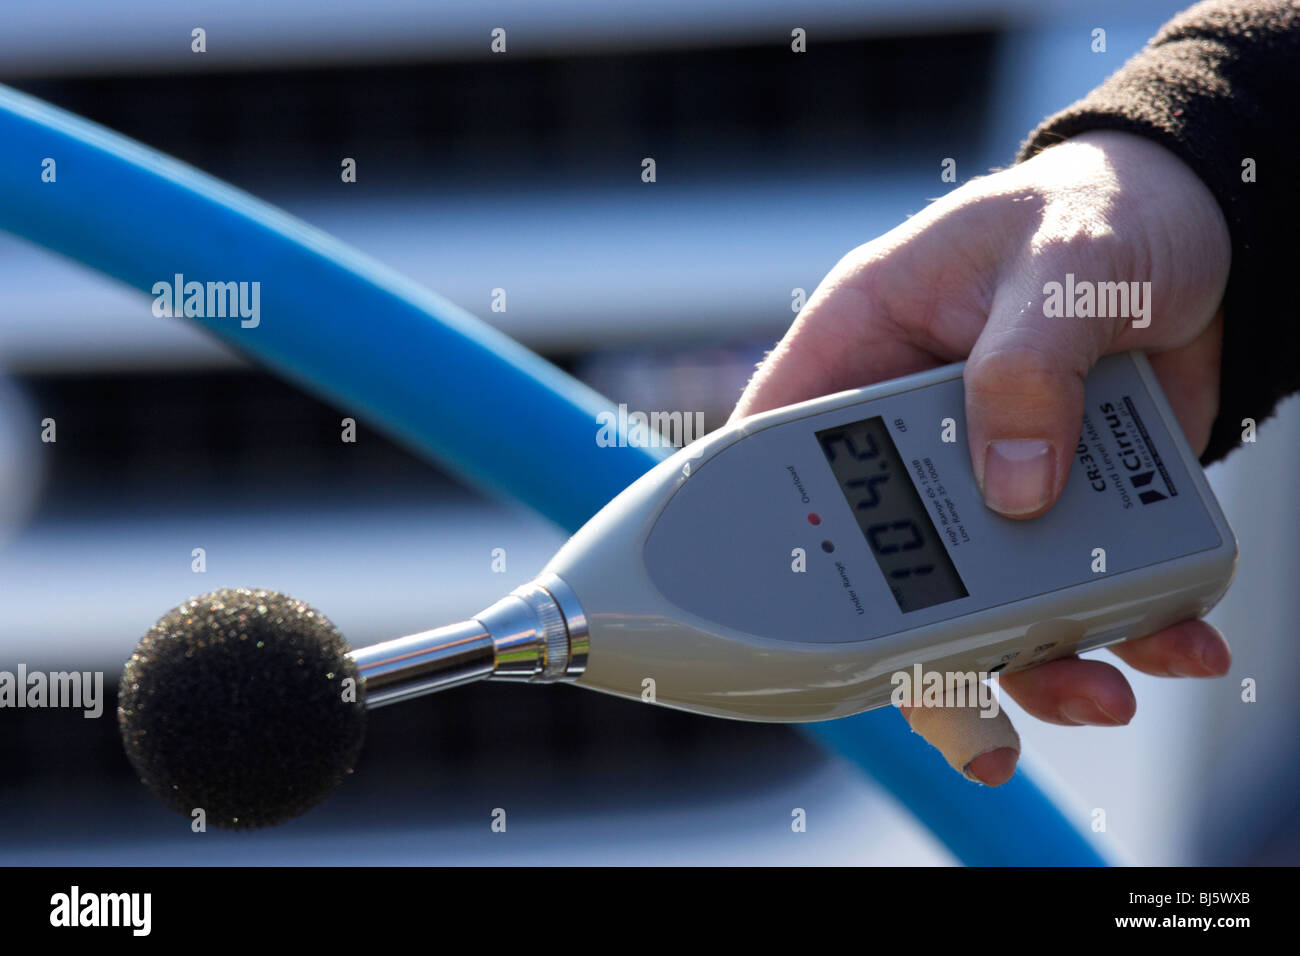 mans hand holding sound level meter with baffle showing measurement of 104.2 dB the meter is used to measure maximum noise Stock Photo